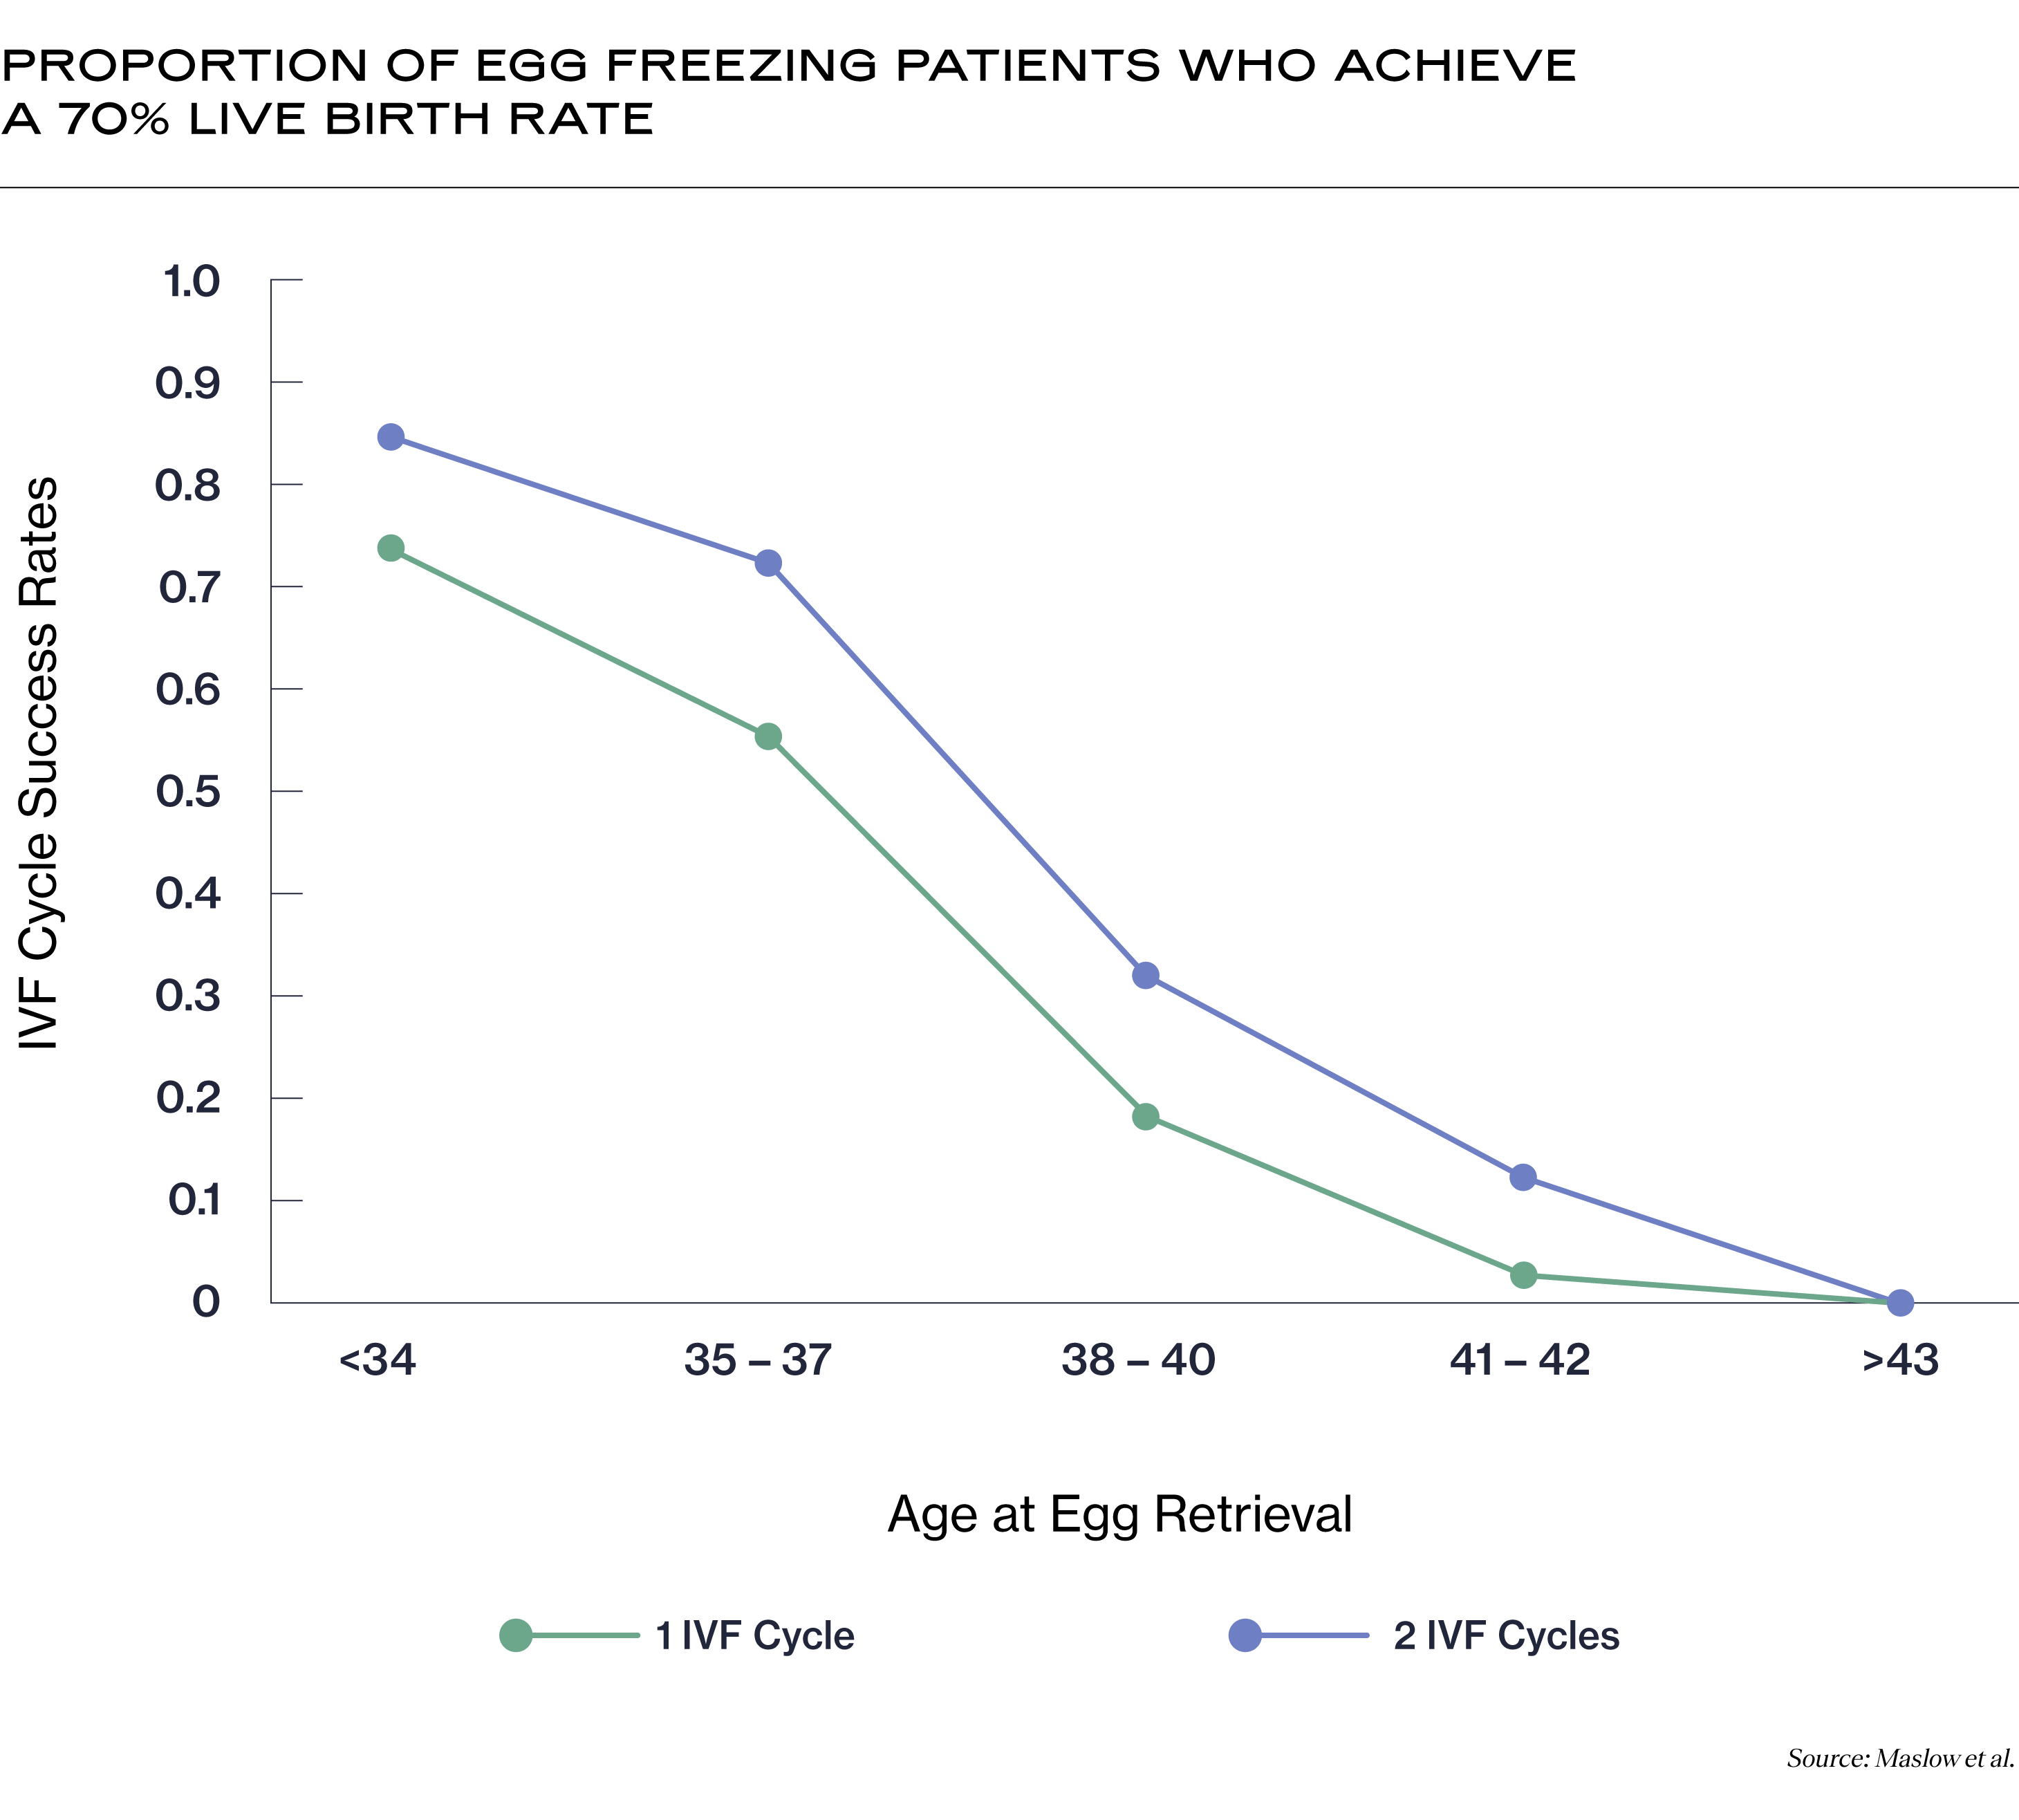 Proportion of Egg Freezing Patients Who Achieve a 70% Live Birth Rate